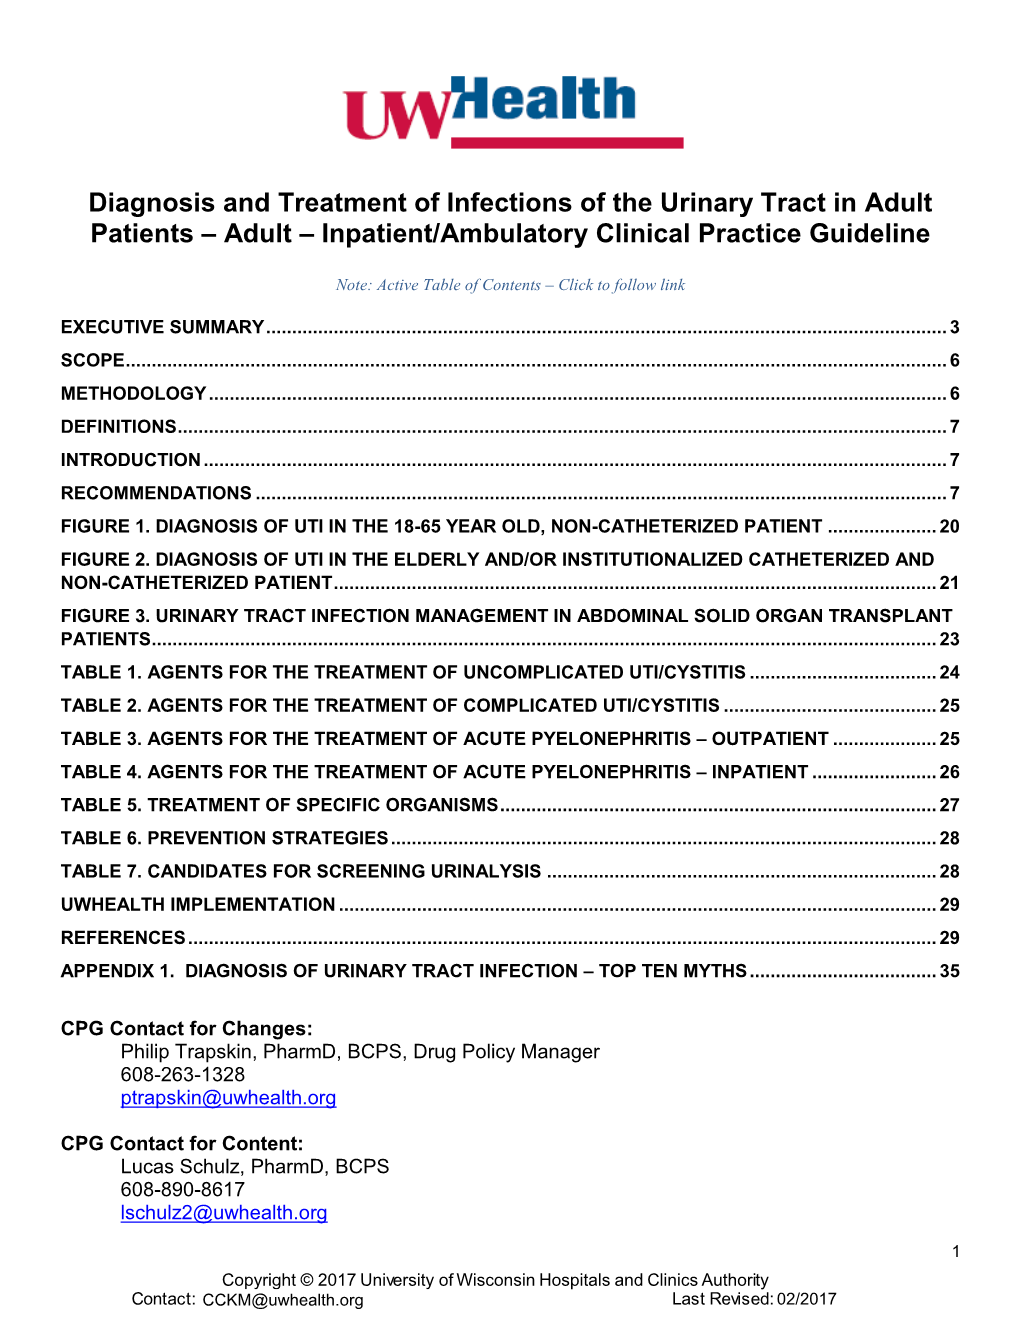 Diagnosis and Treatment of Infections of the Urinary Tract in Adult Patients – Adult – Inpatient/Ambulatory Clinical Practice Guideline